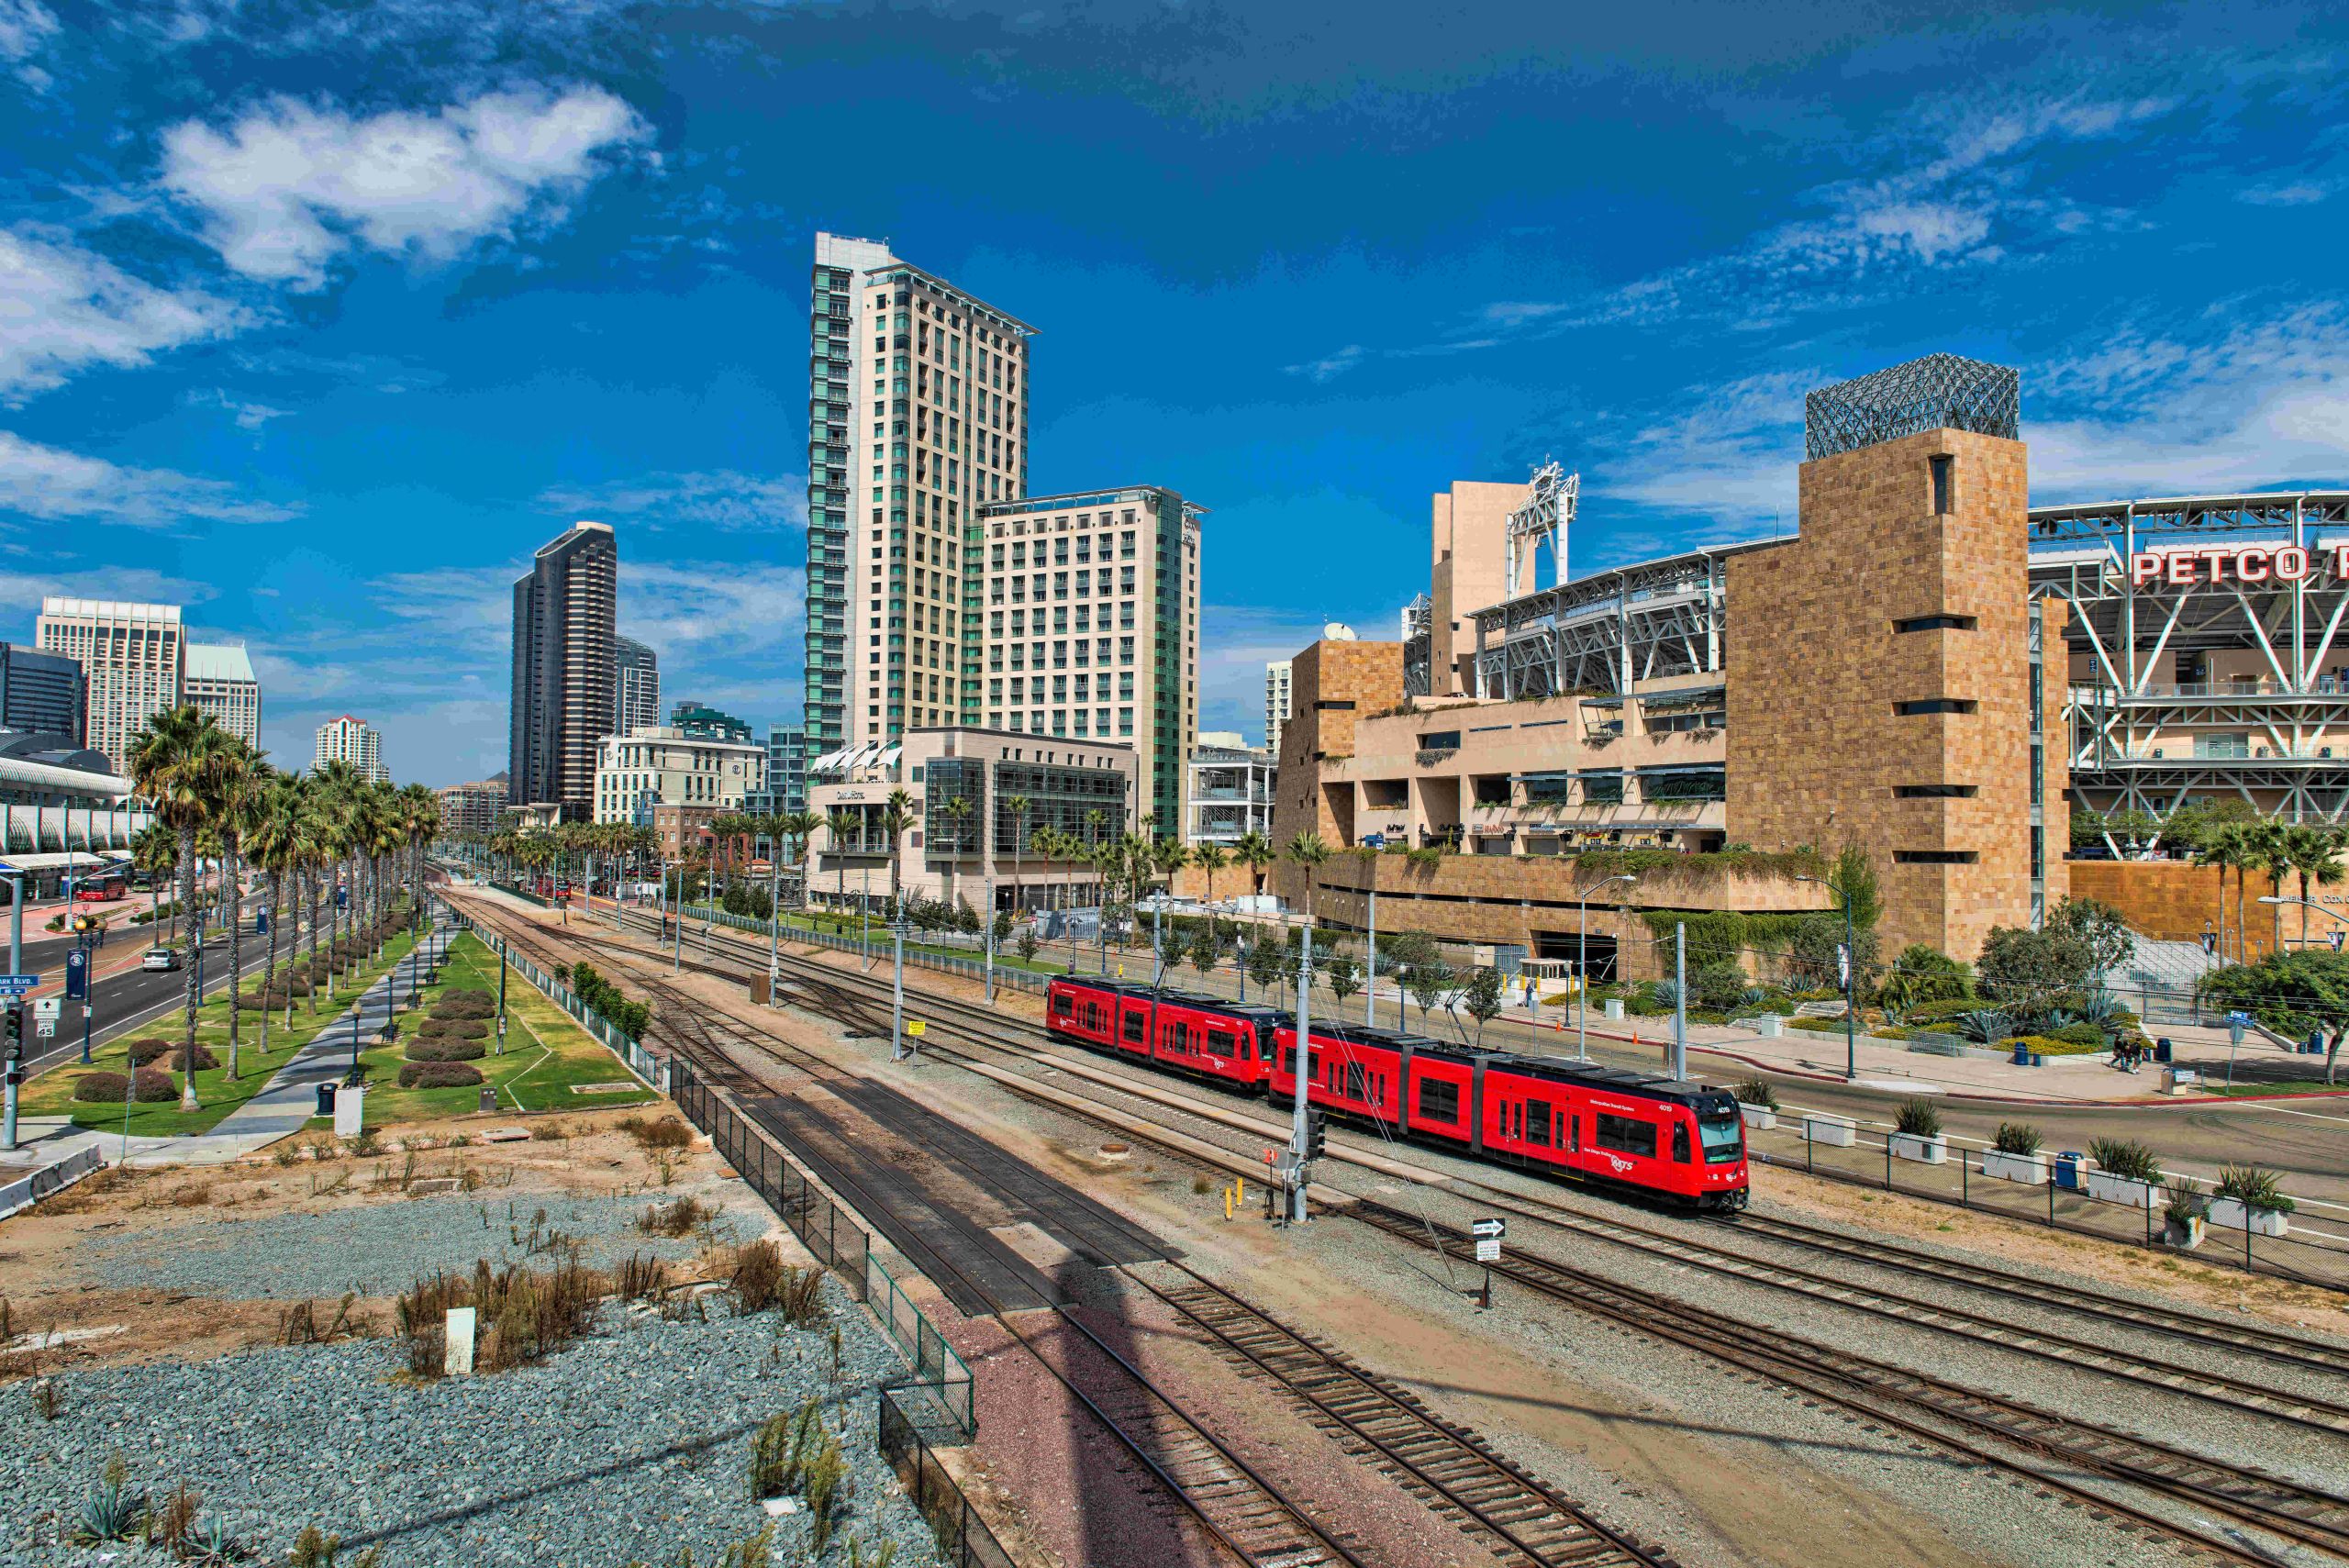 Panoramic photo of part of San Diego. Shows cityscape and train railroad.